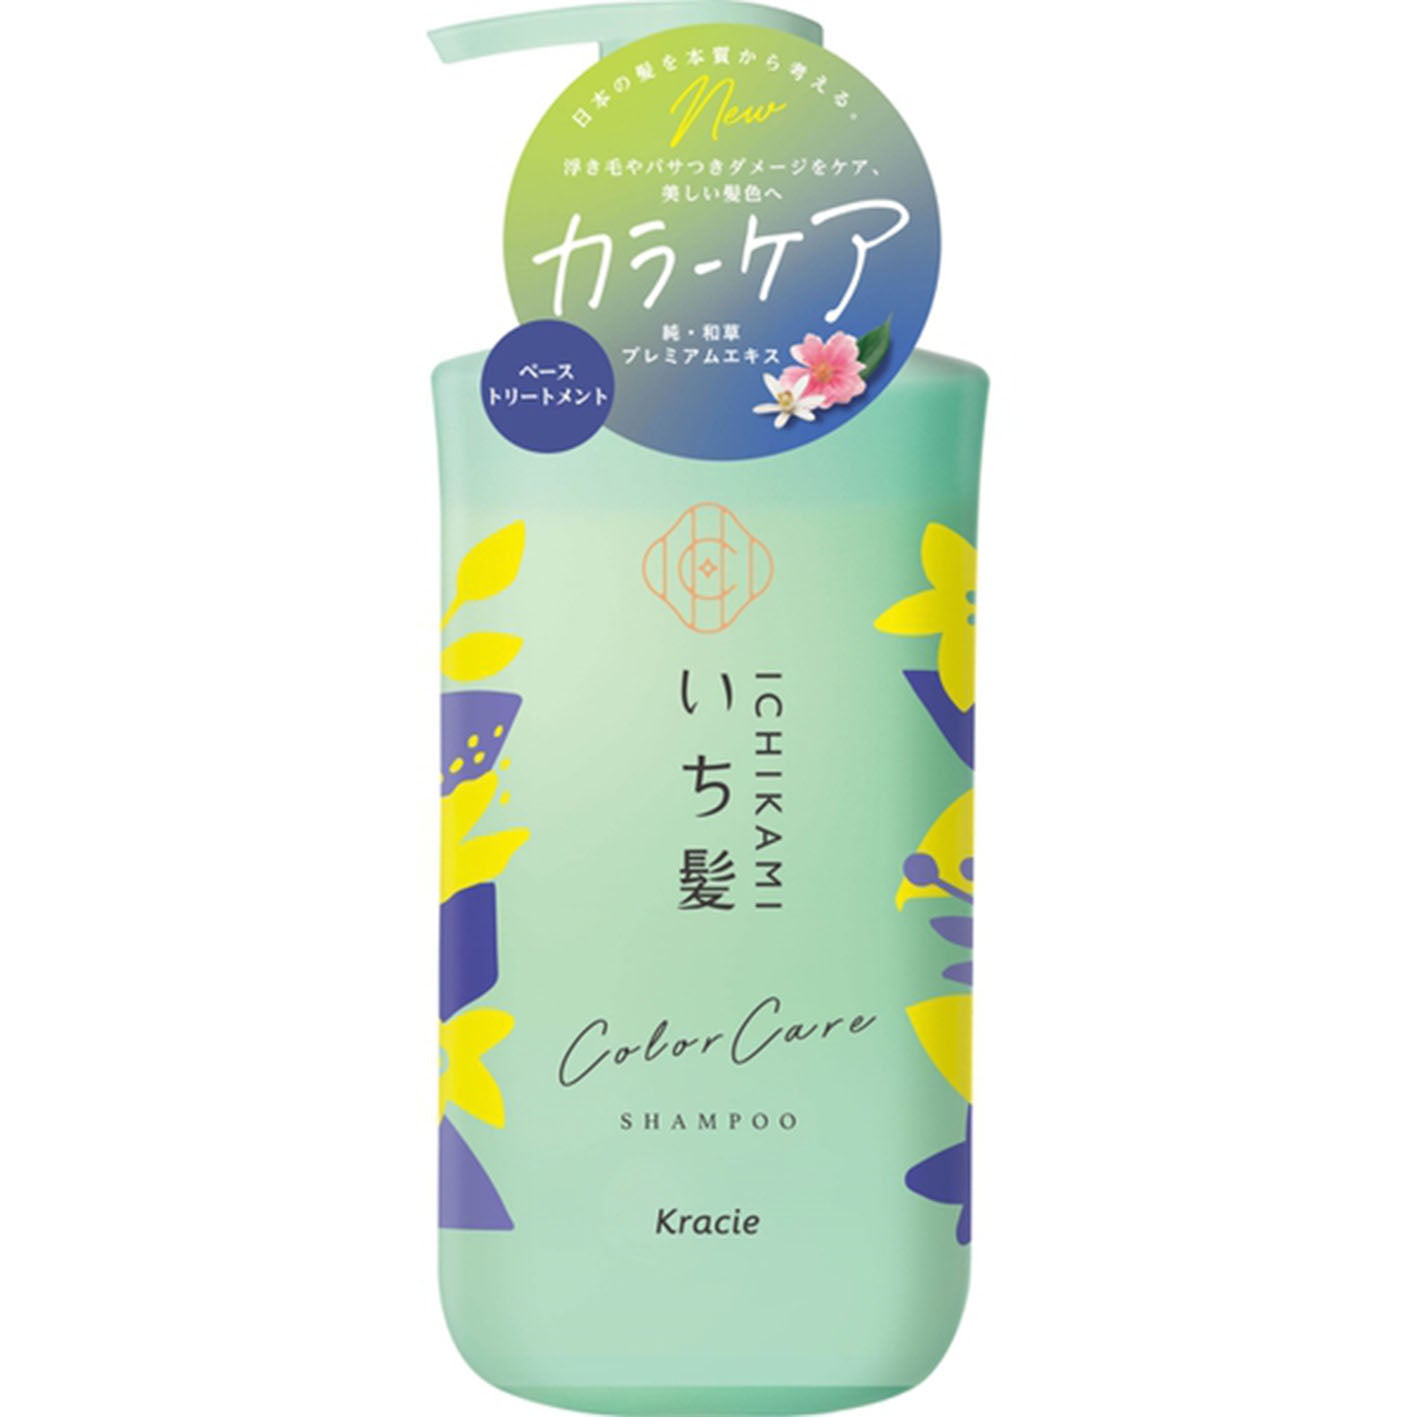 Ichikami Color Care Hair Shampoo - 480ml - Harajuku Culture Japan - Japanease Products Store Beauty and Stationery